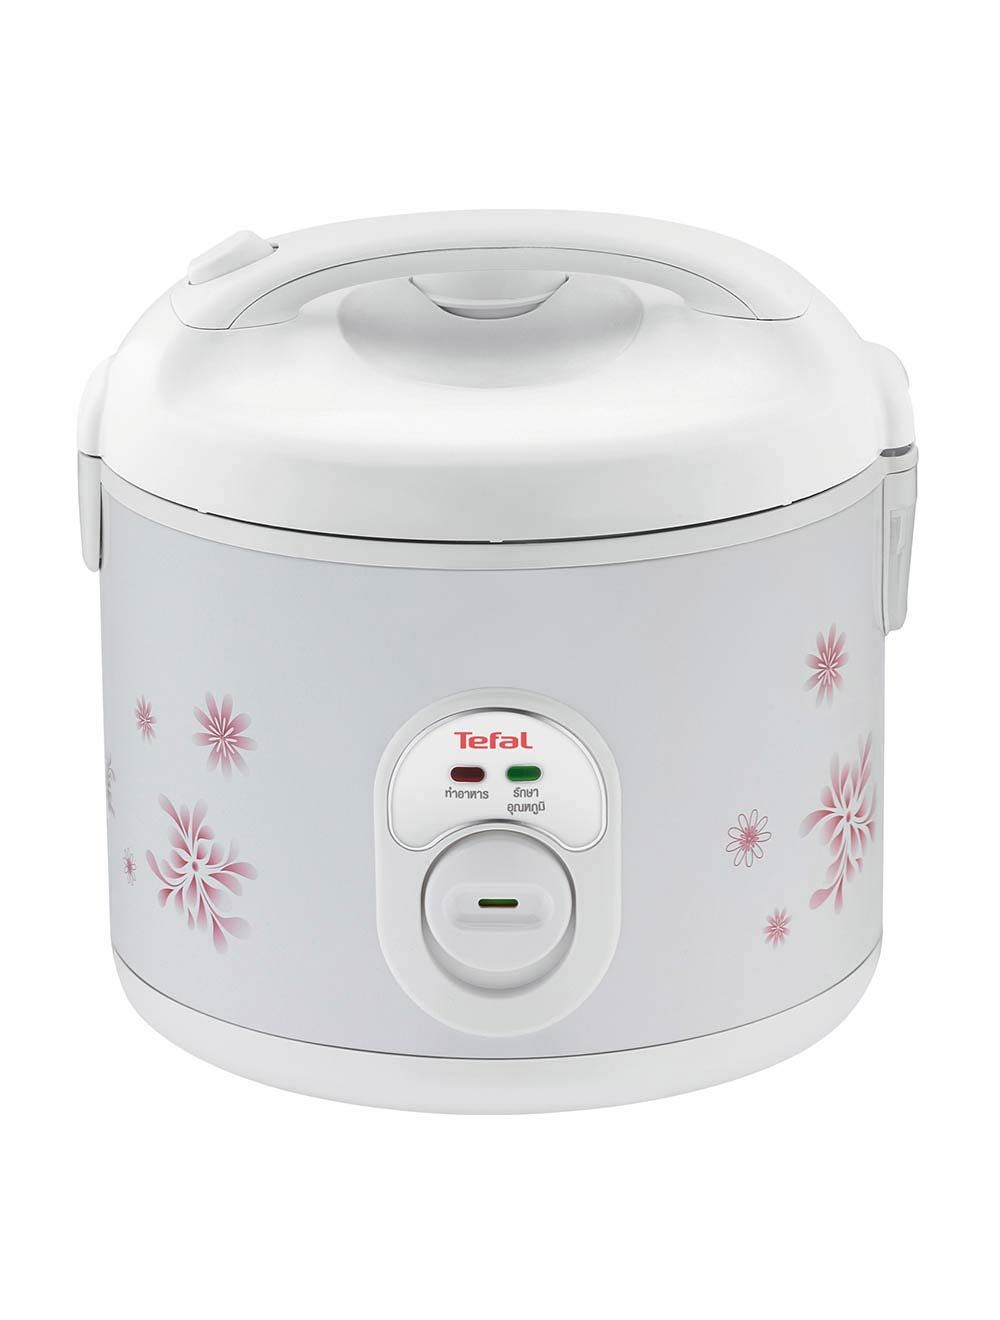 Tefal Easy Cook 1.8 L Rice Cooker, 600 Watts RK101827